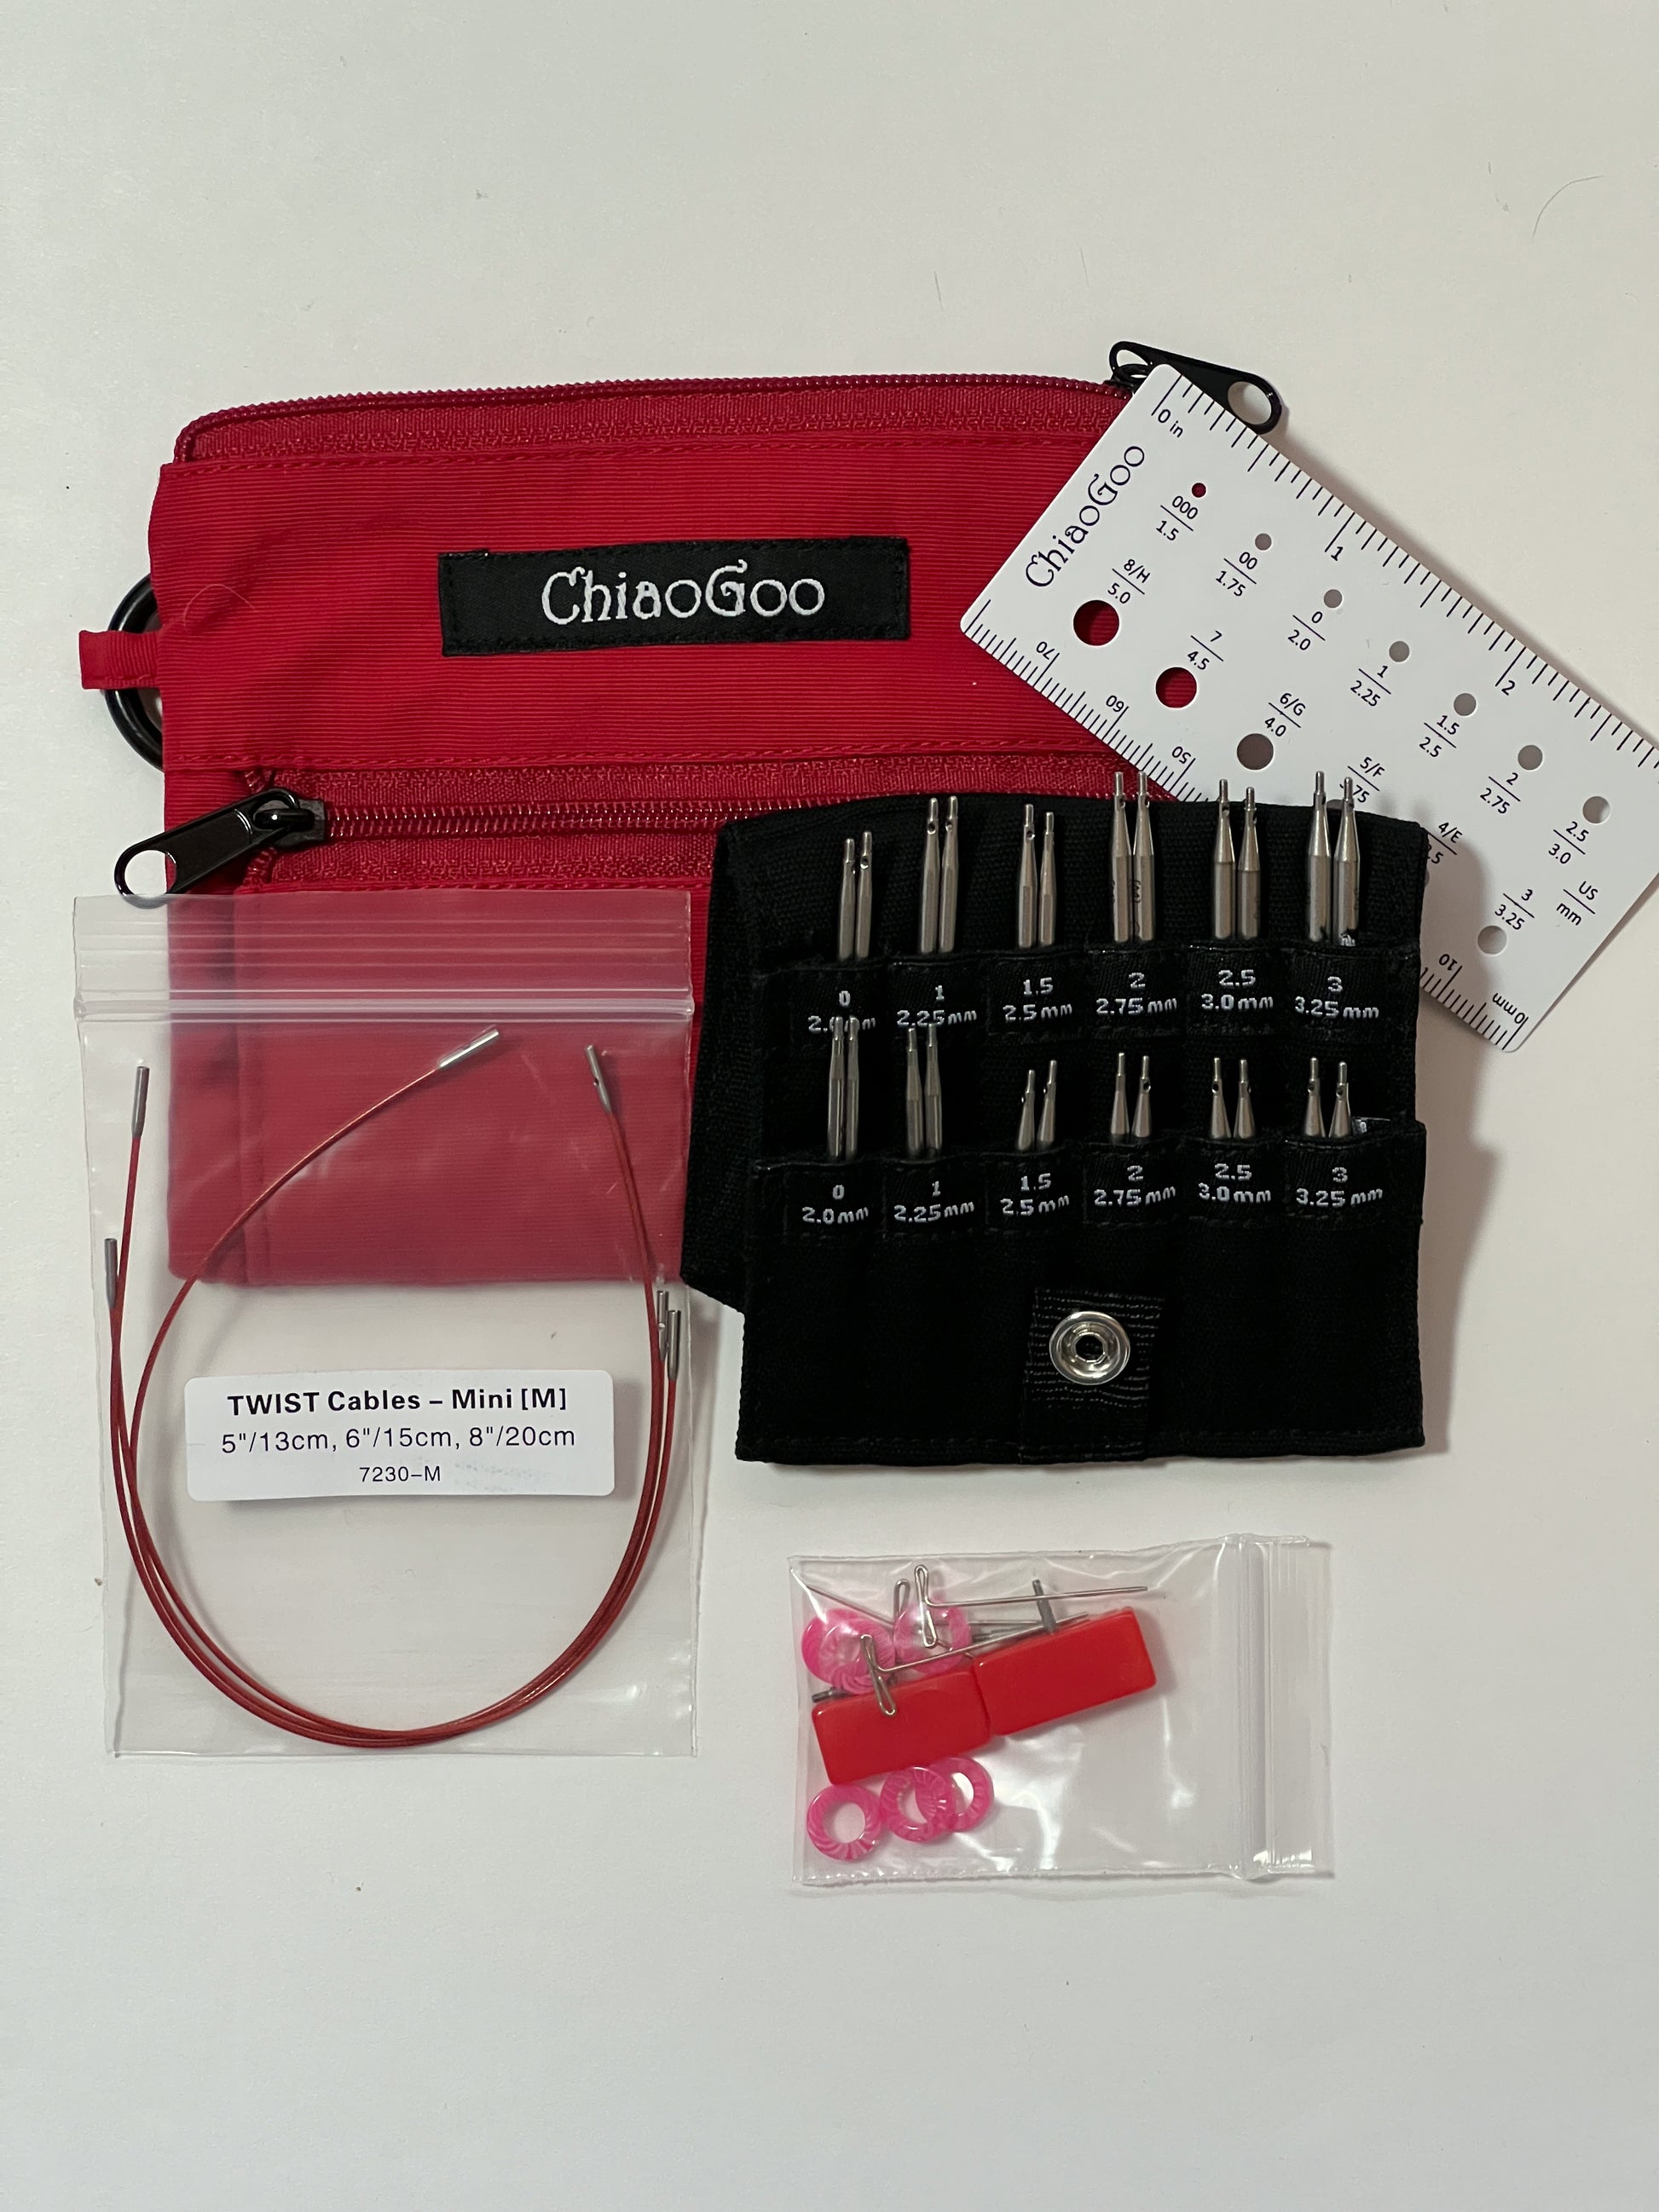 Chiaogoo Red TWIST Cable (Small)